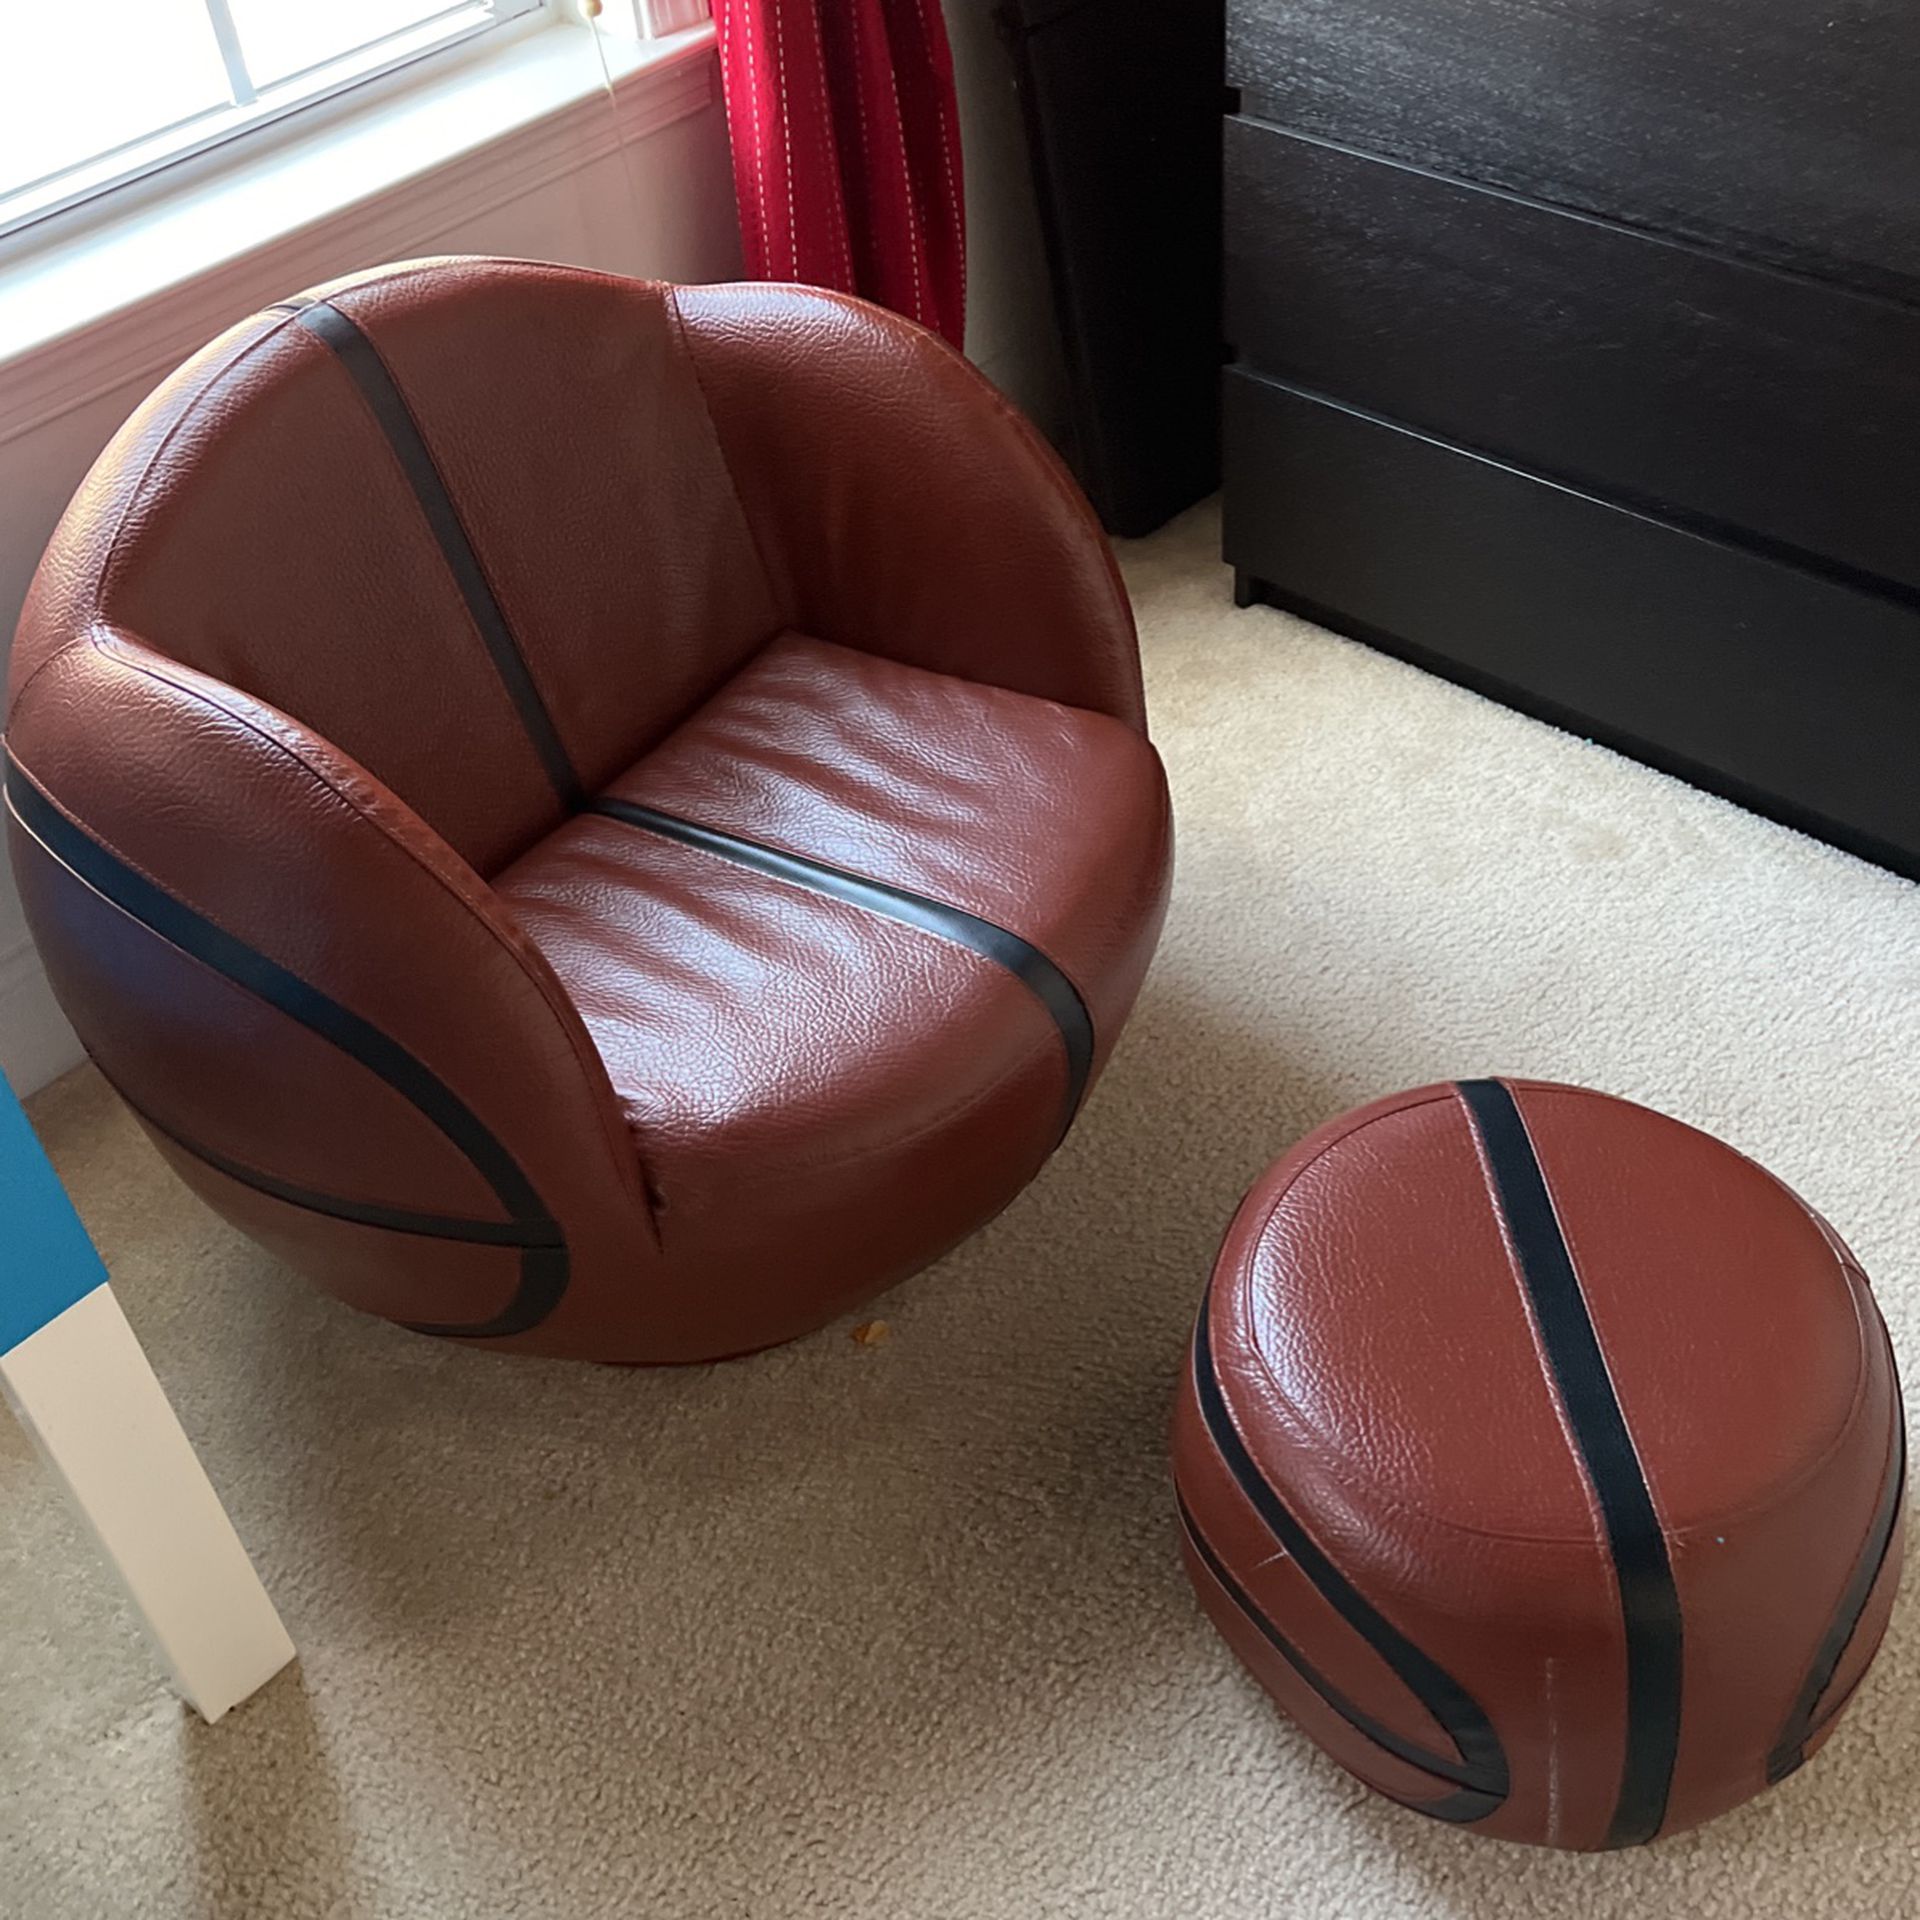 Basketball Couch